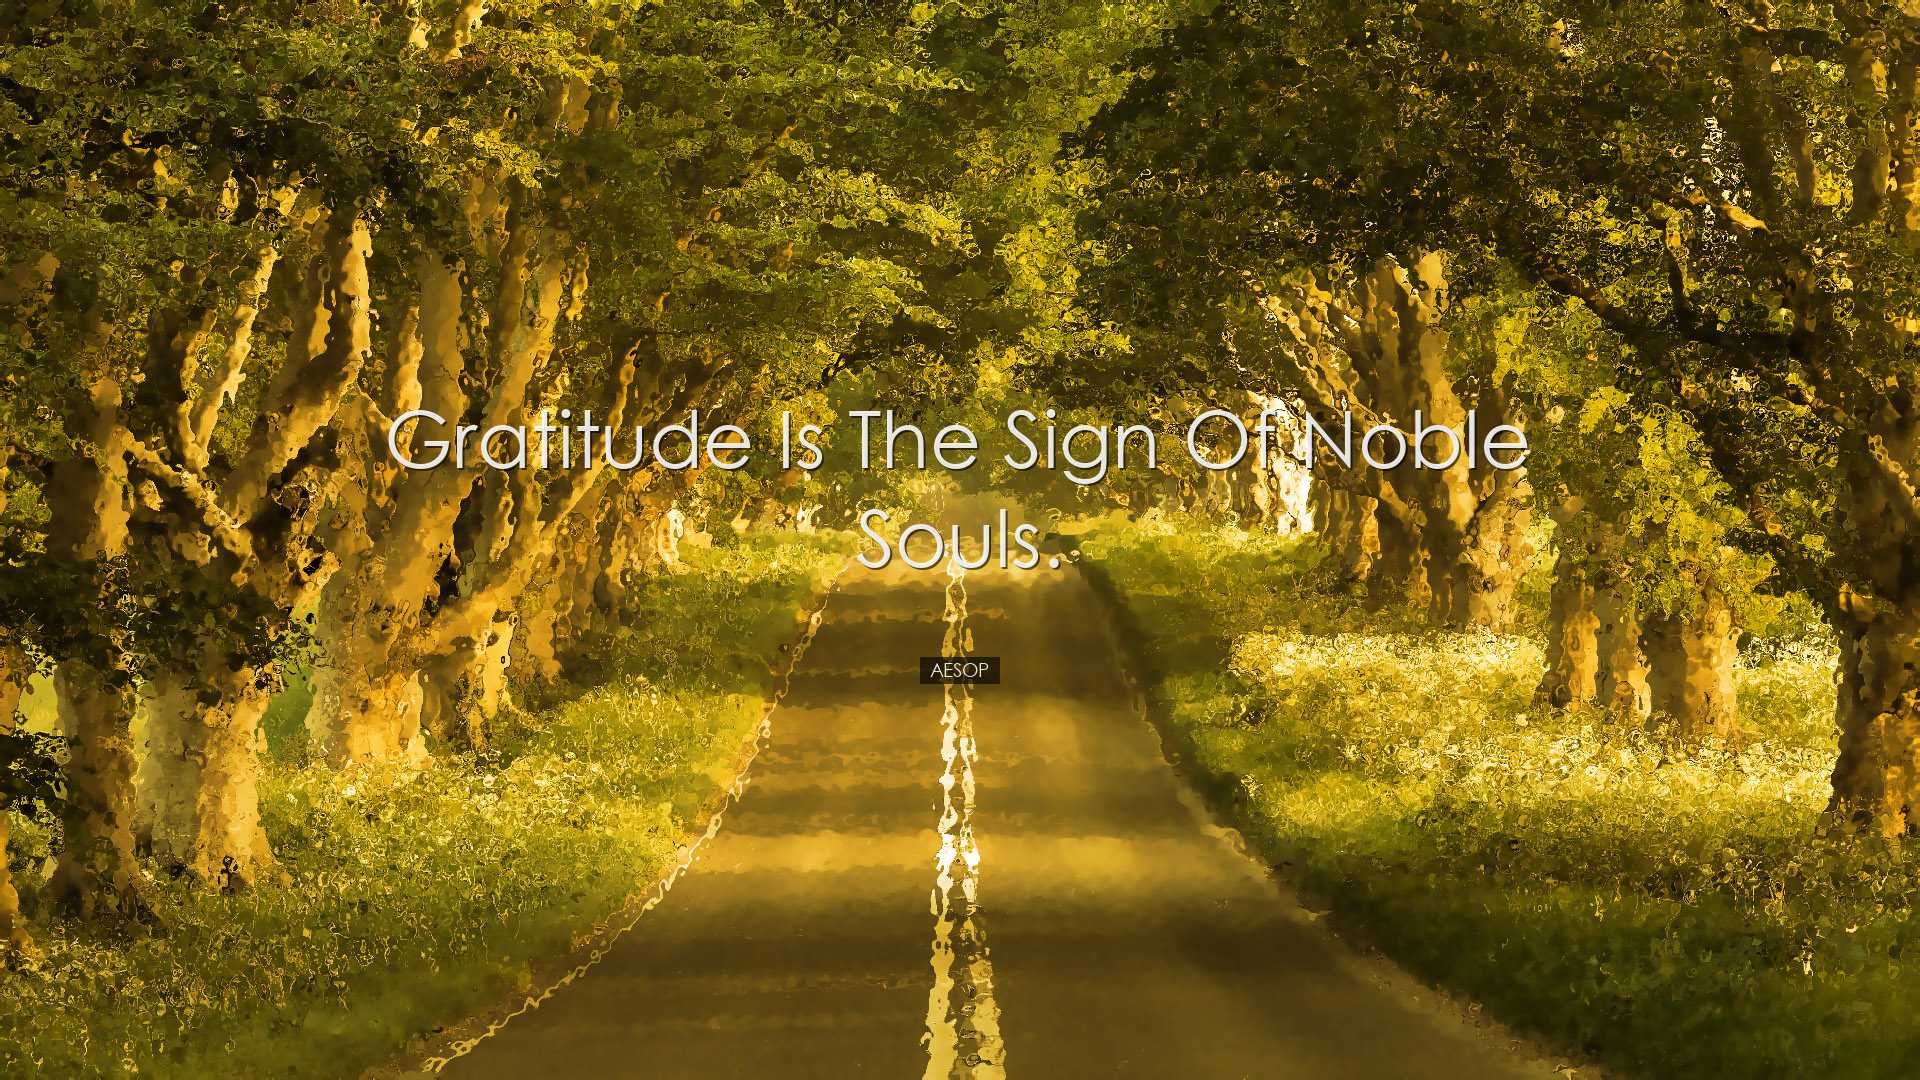 Gratitude is the sign of noble souls. - Aesop